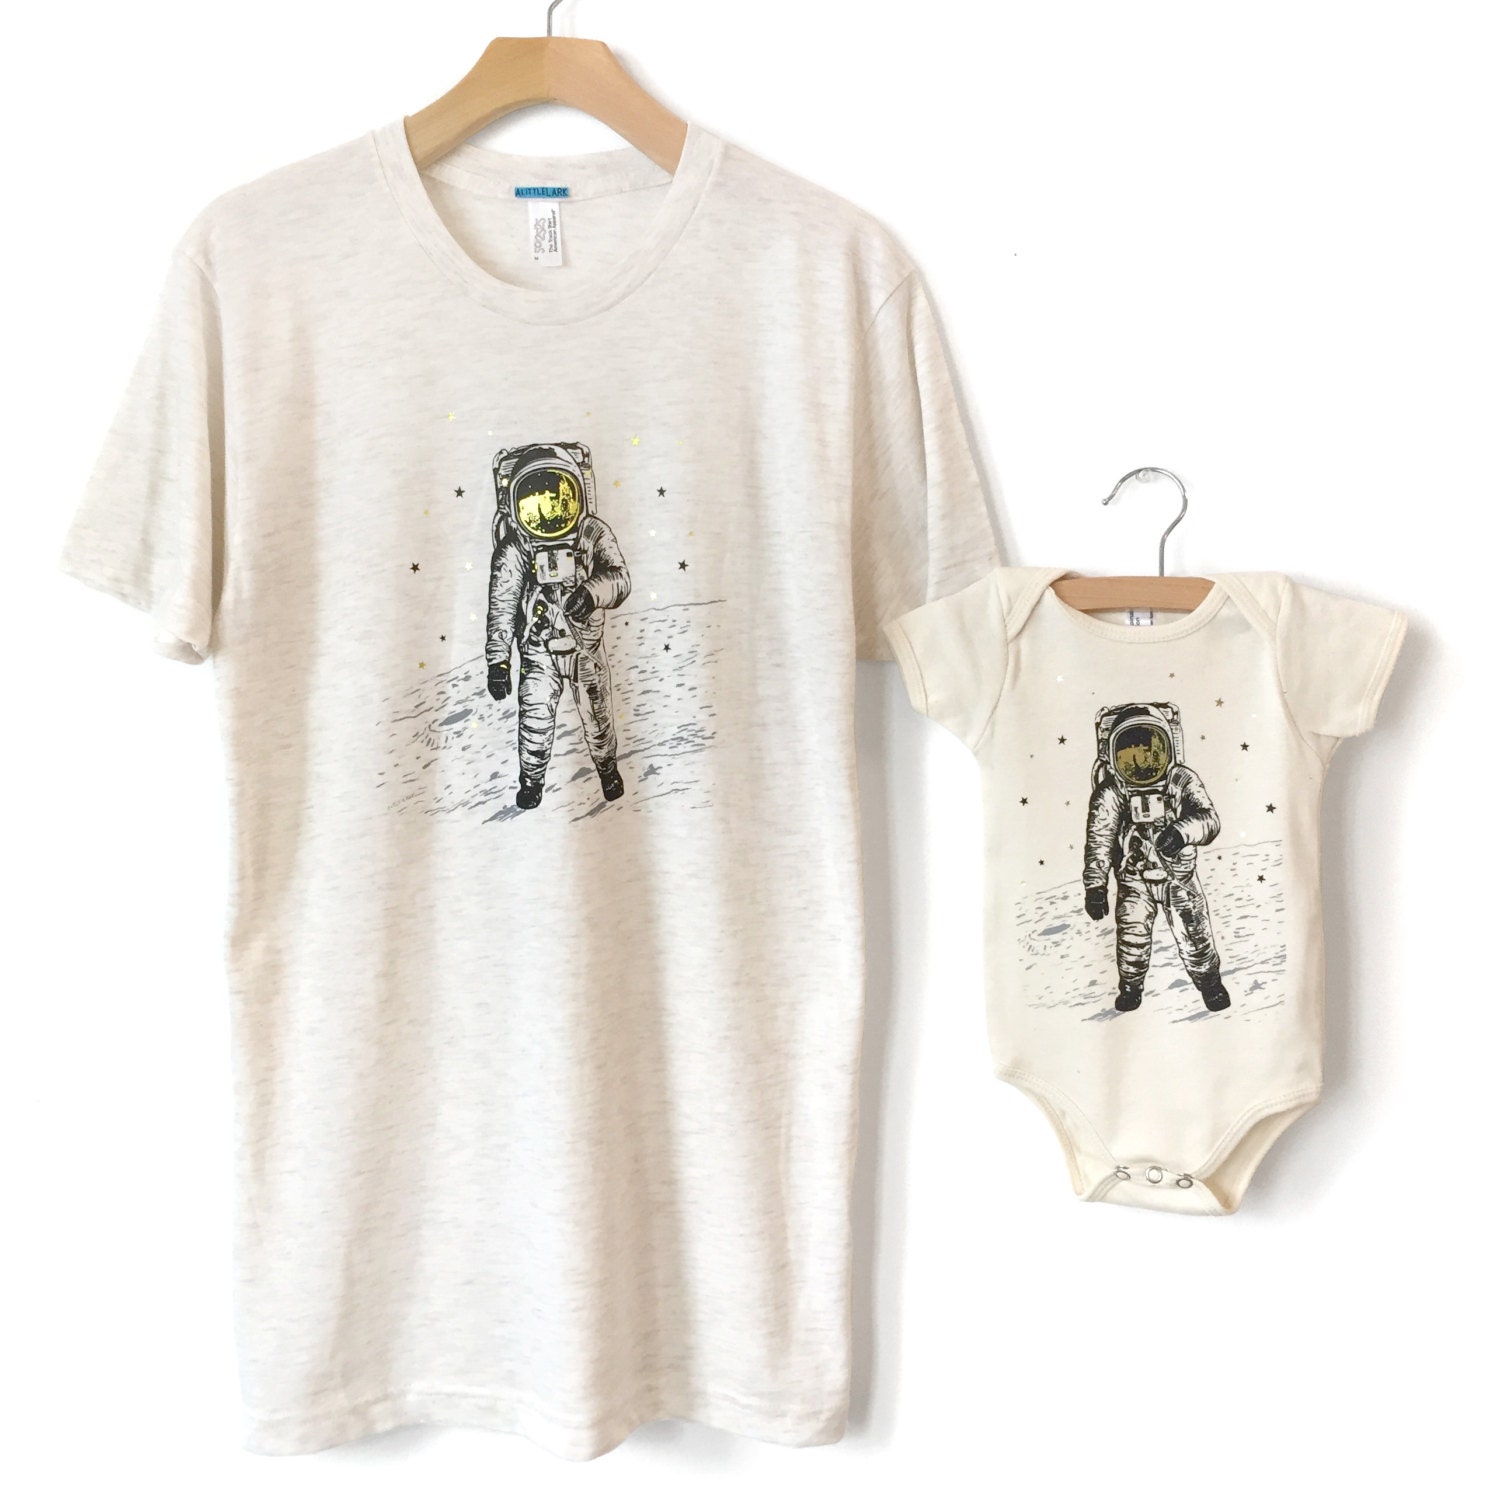 new dad shirt Fathers Day gift Astronaut T shirts daughter gift for dad from son father daughter Matching Tees Father Son Shirts kids